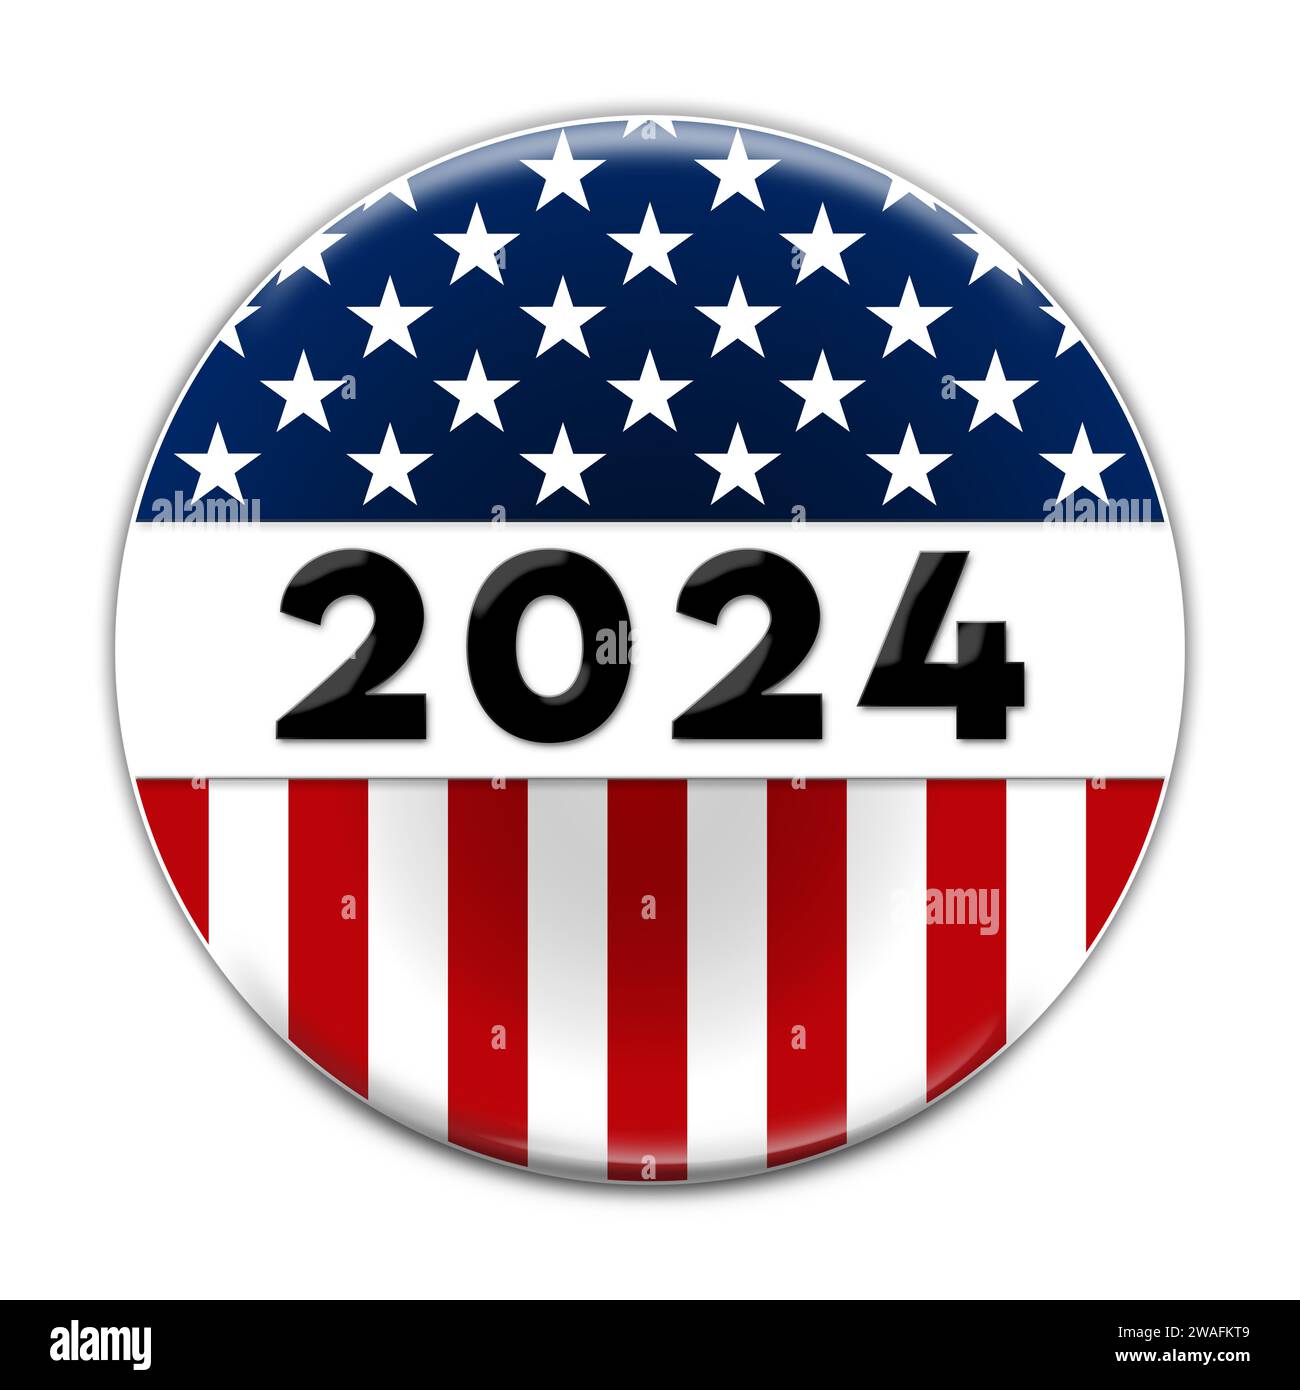 Presidential Election button for 2024 in US colors Stock Photo